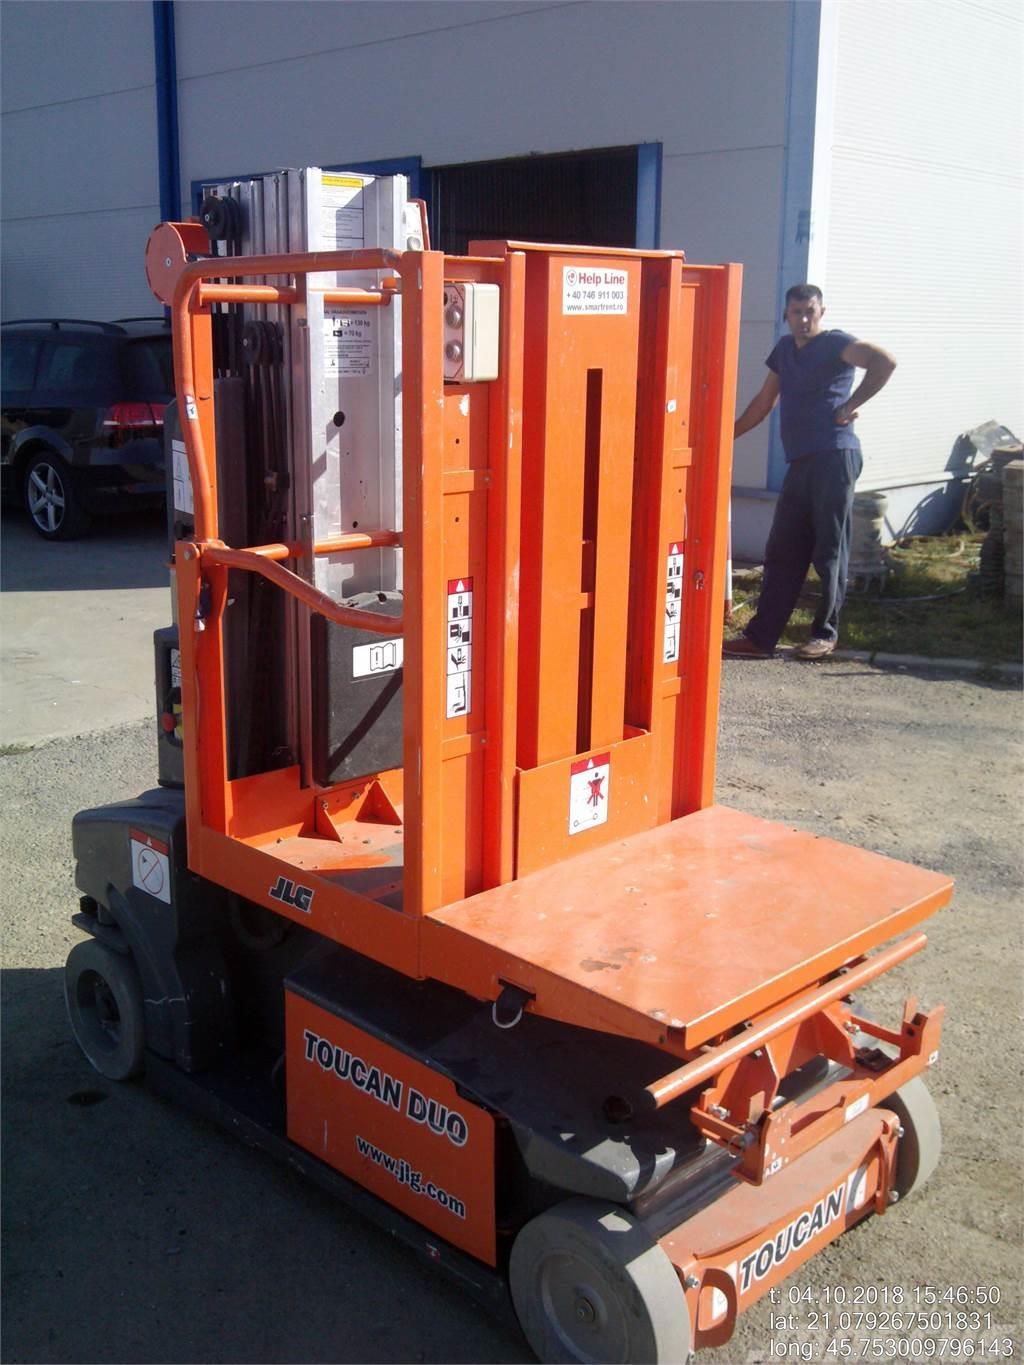 JLG Toucan duo Andere